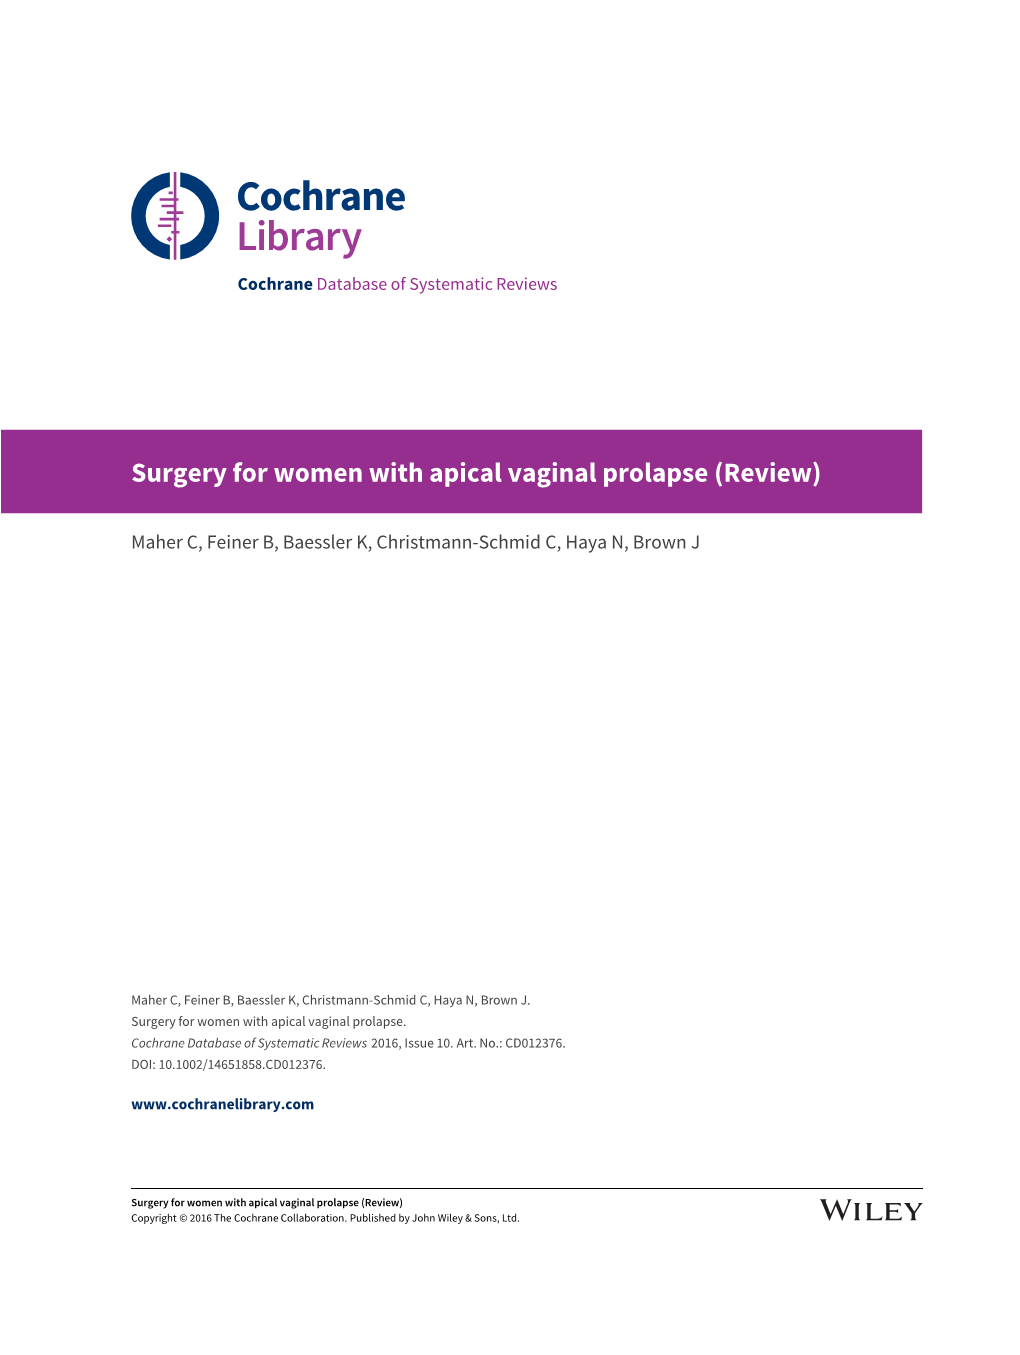 Surgery for Women with Apical Vaginal Prolapse (Review)